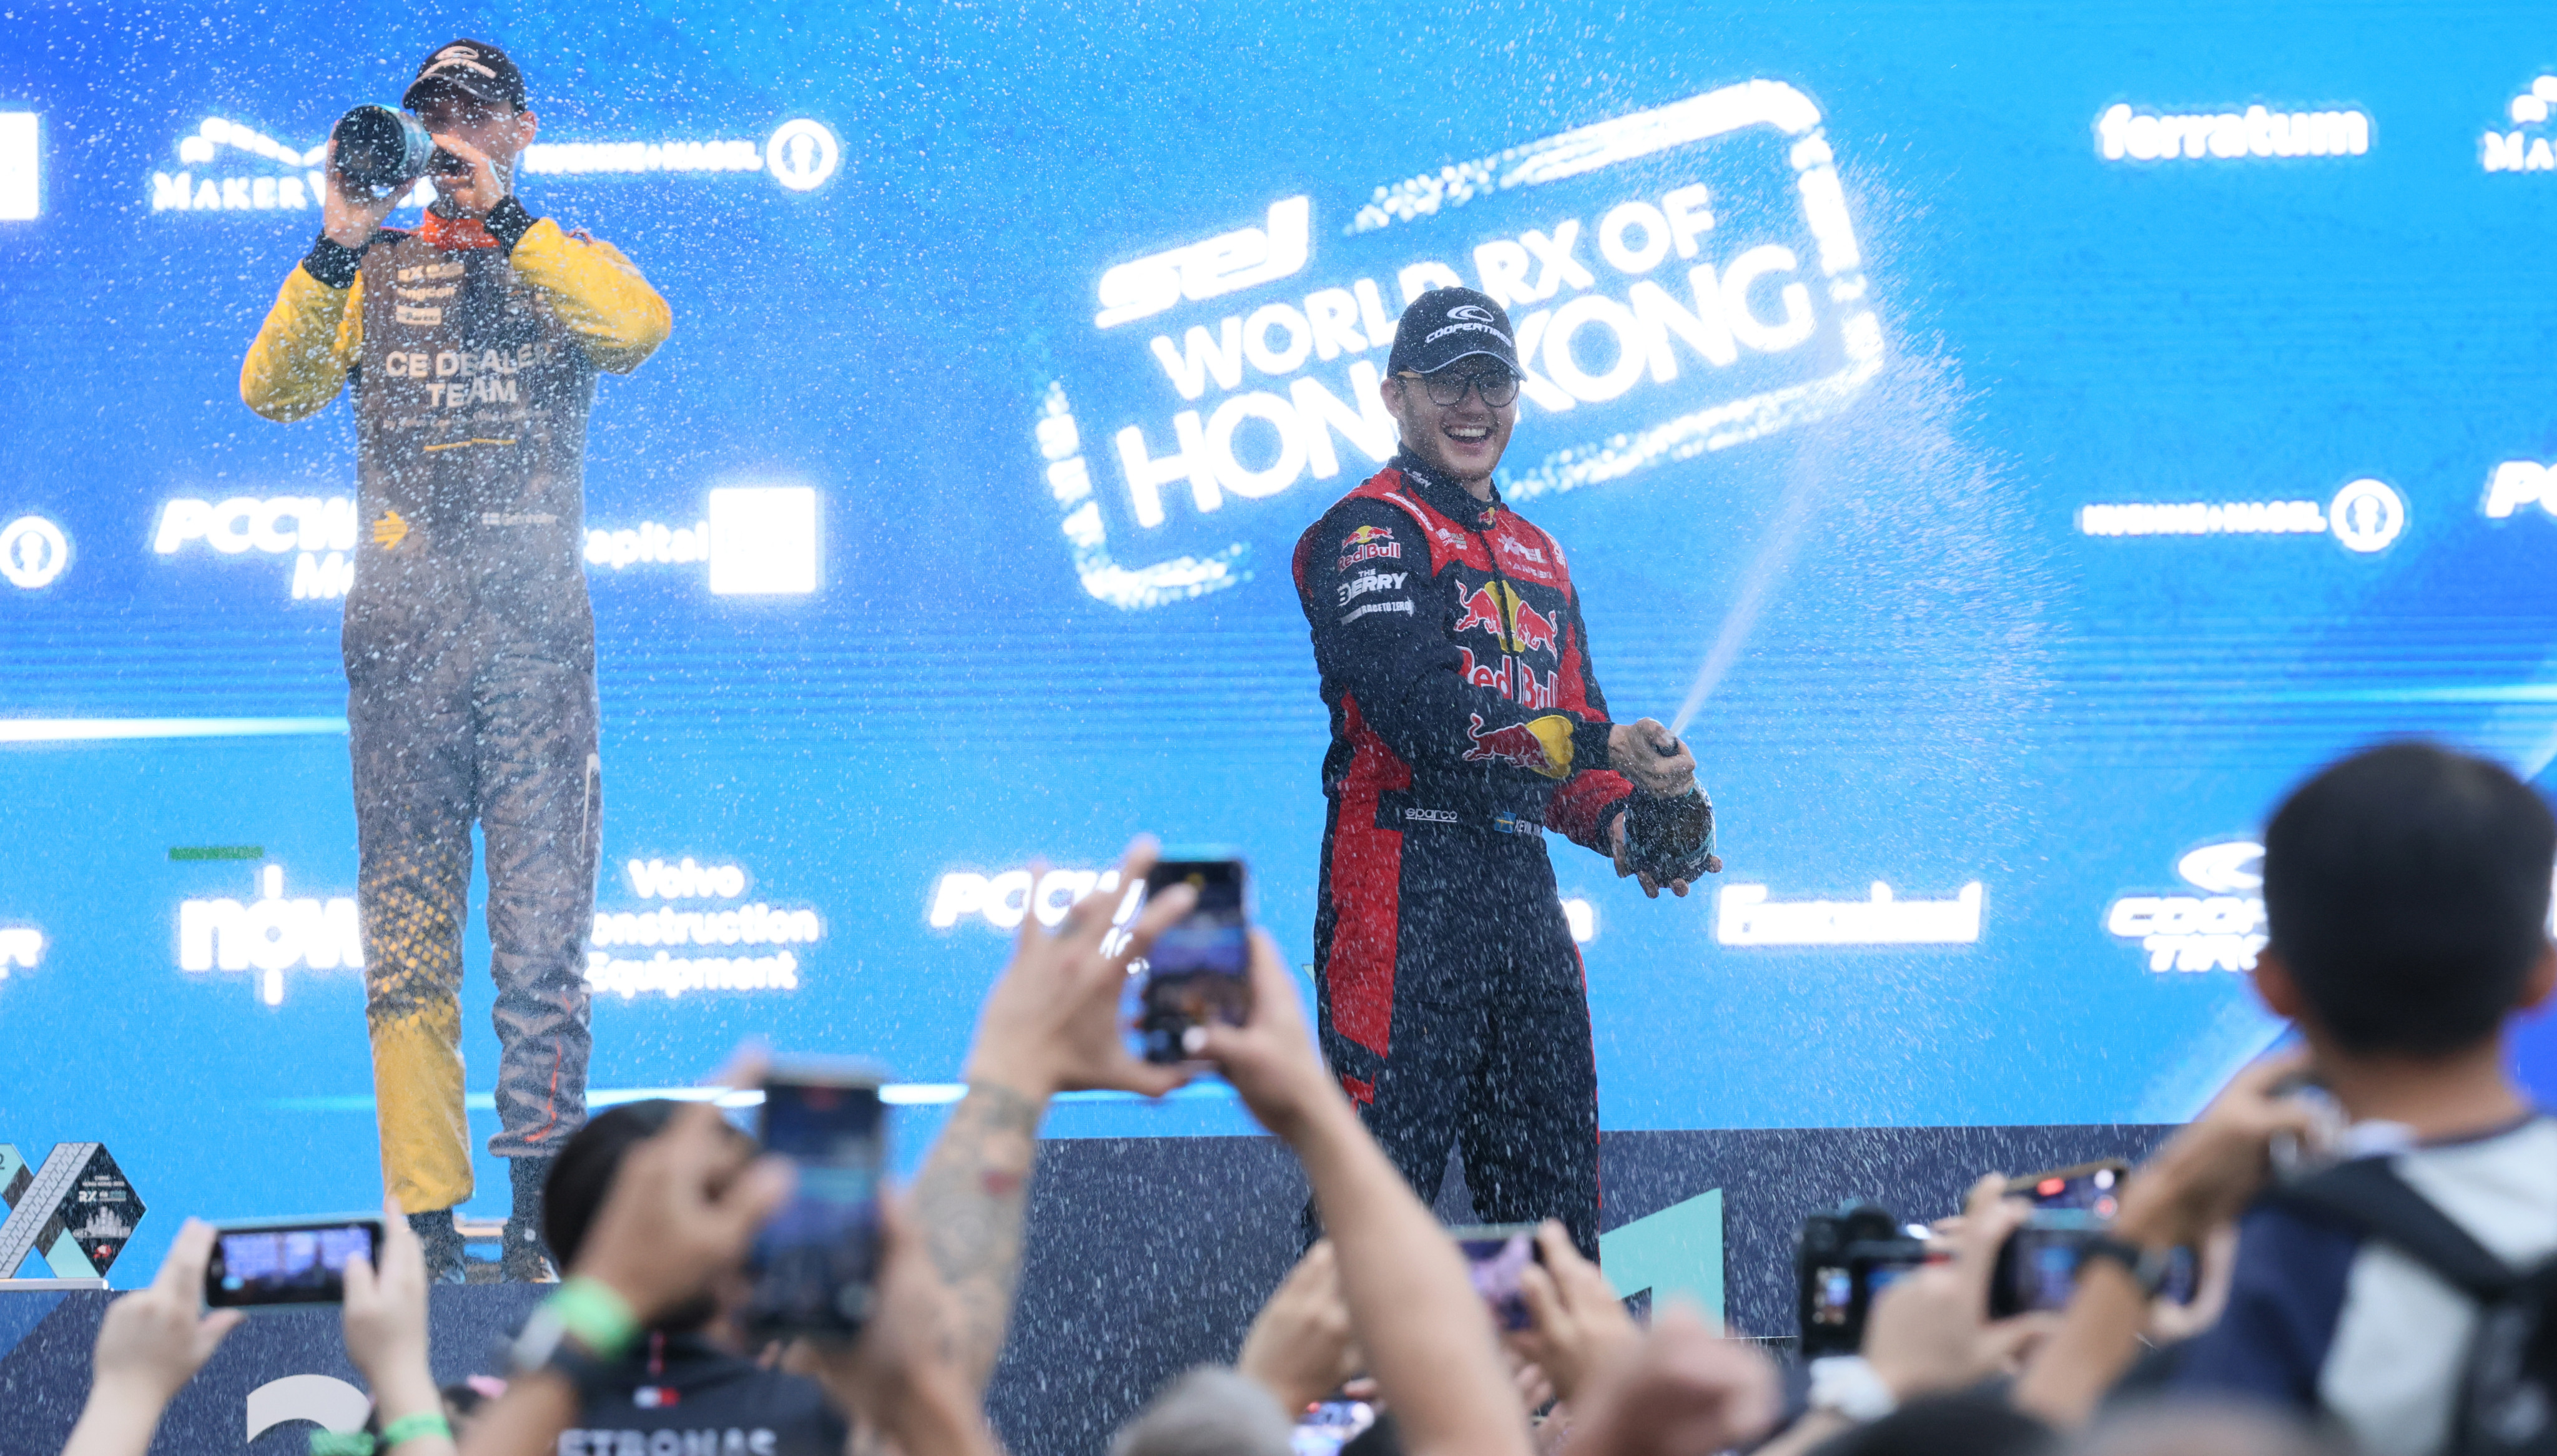 Kevin Hansen of Hansen World RX Team celebrates on the podium after winning the first race of the FIA World Rallycross double header in Hong Kong at the Central Harbourfront Event Space. Photo: Dickson Lee